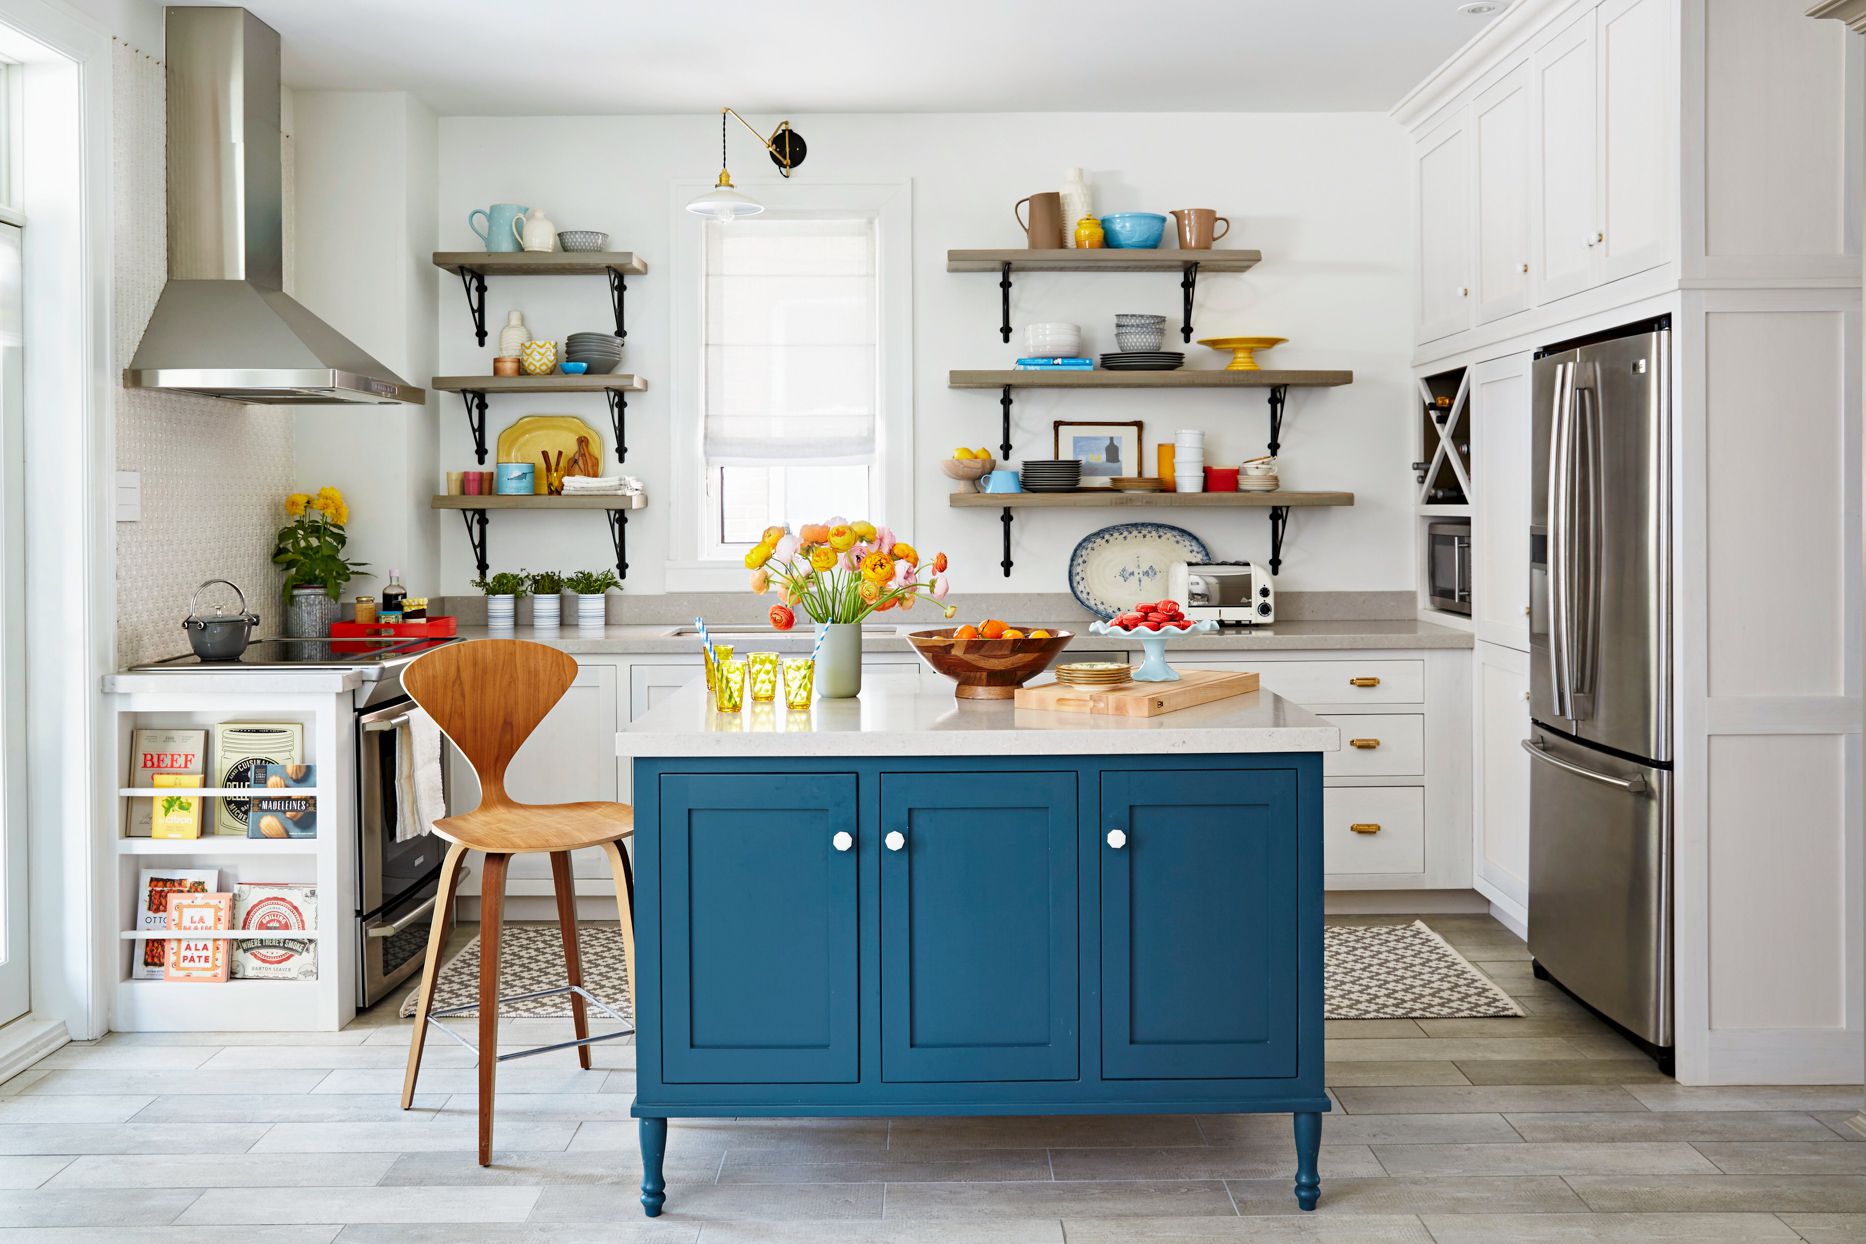 2 Use your island to create a colorful kitchen